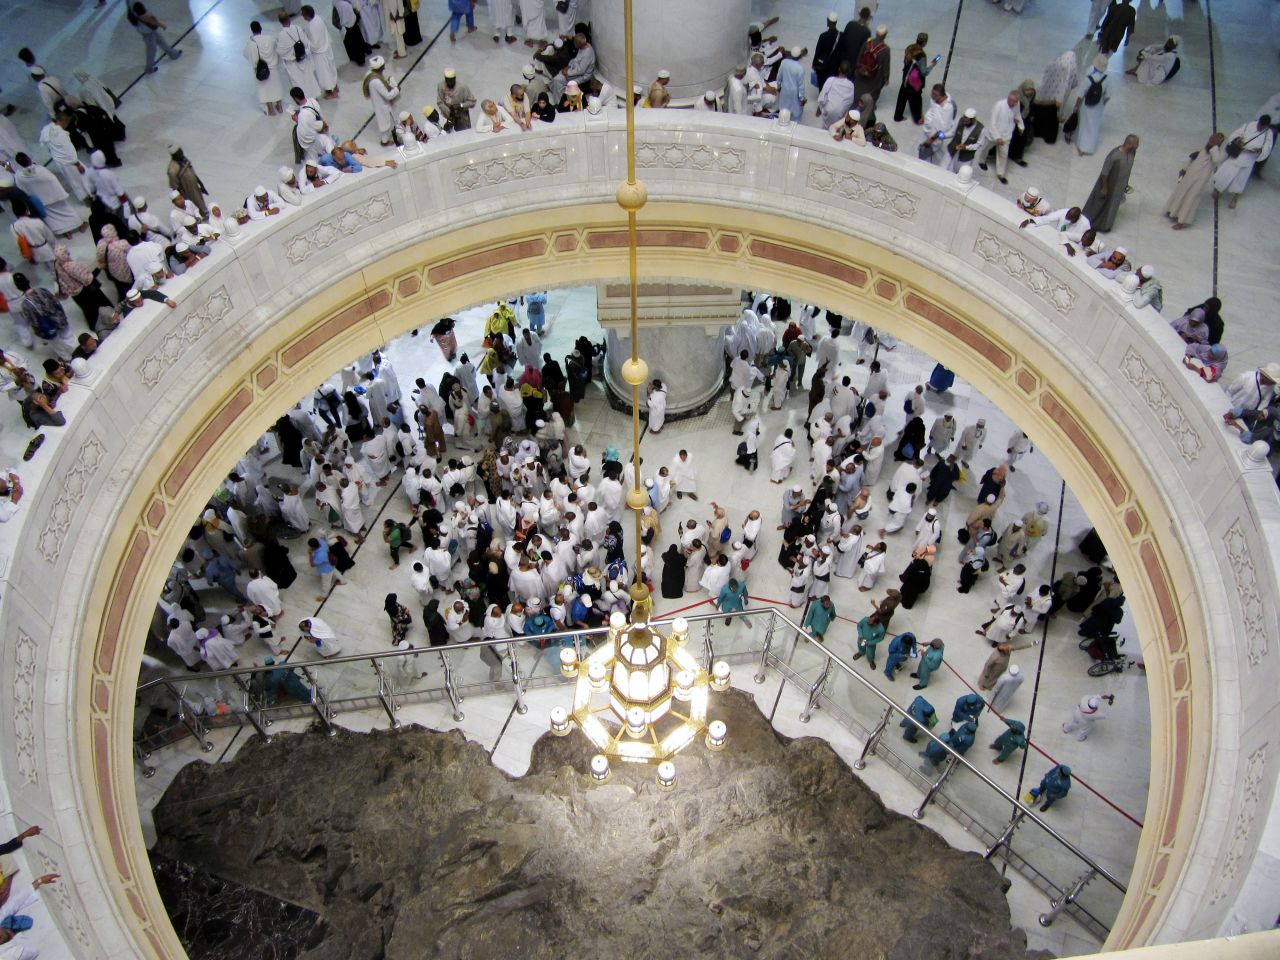 Pilgrims pray at the Grand Mosque as the Hajj begins on Friday.